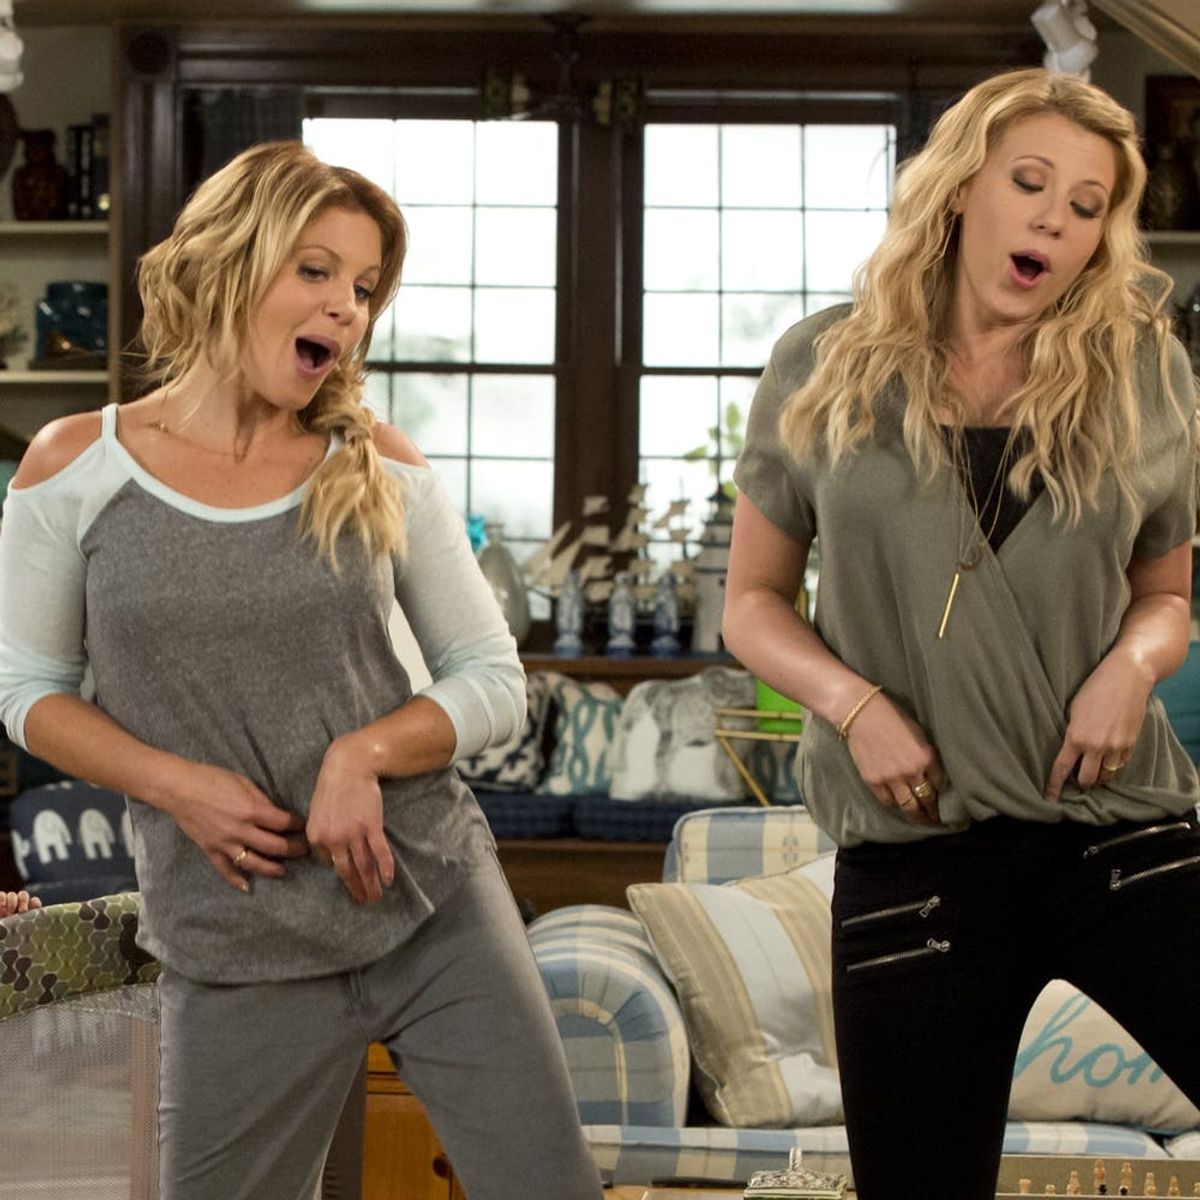 Candace Cameron Bure Just Revealed the “Fuller House” Season 3, Part 2 Release Date